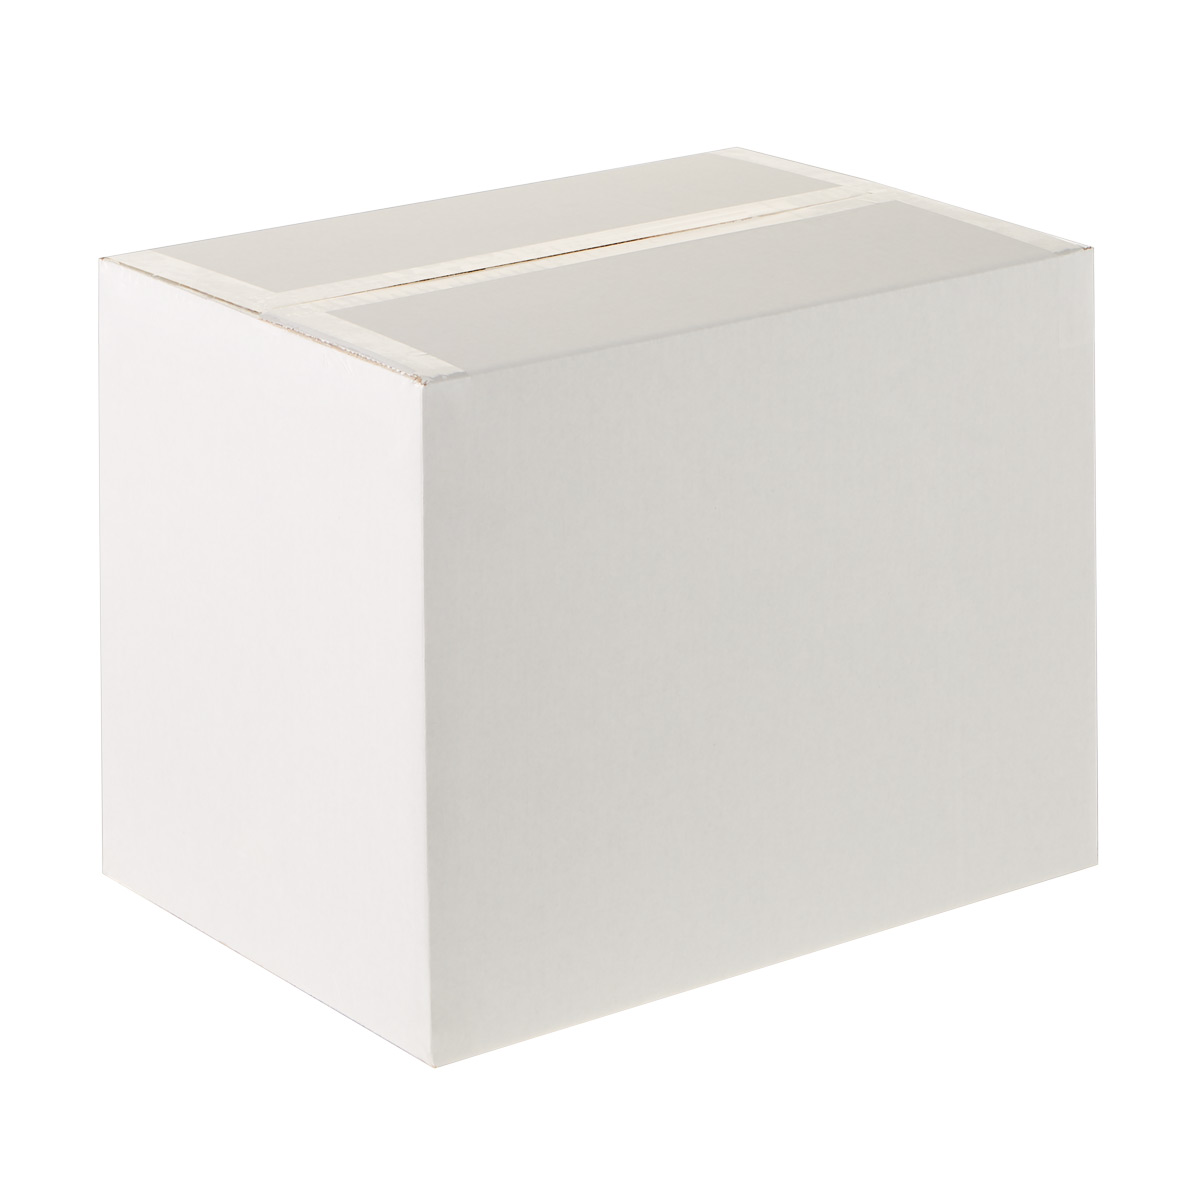 https://www.containerstore.com/catalogimages/419782/200015_medium_corrugated_moving_box.jpg